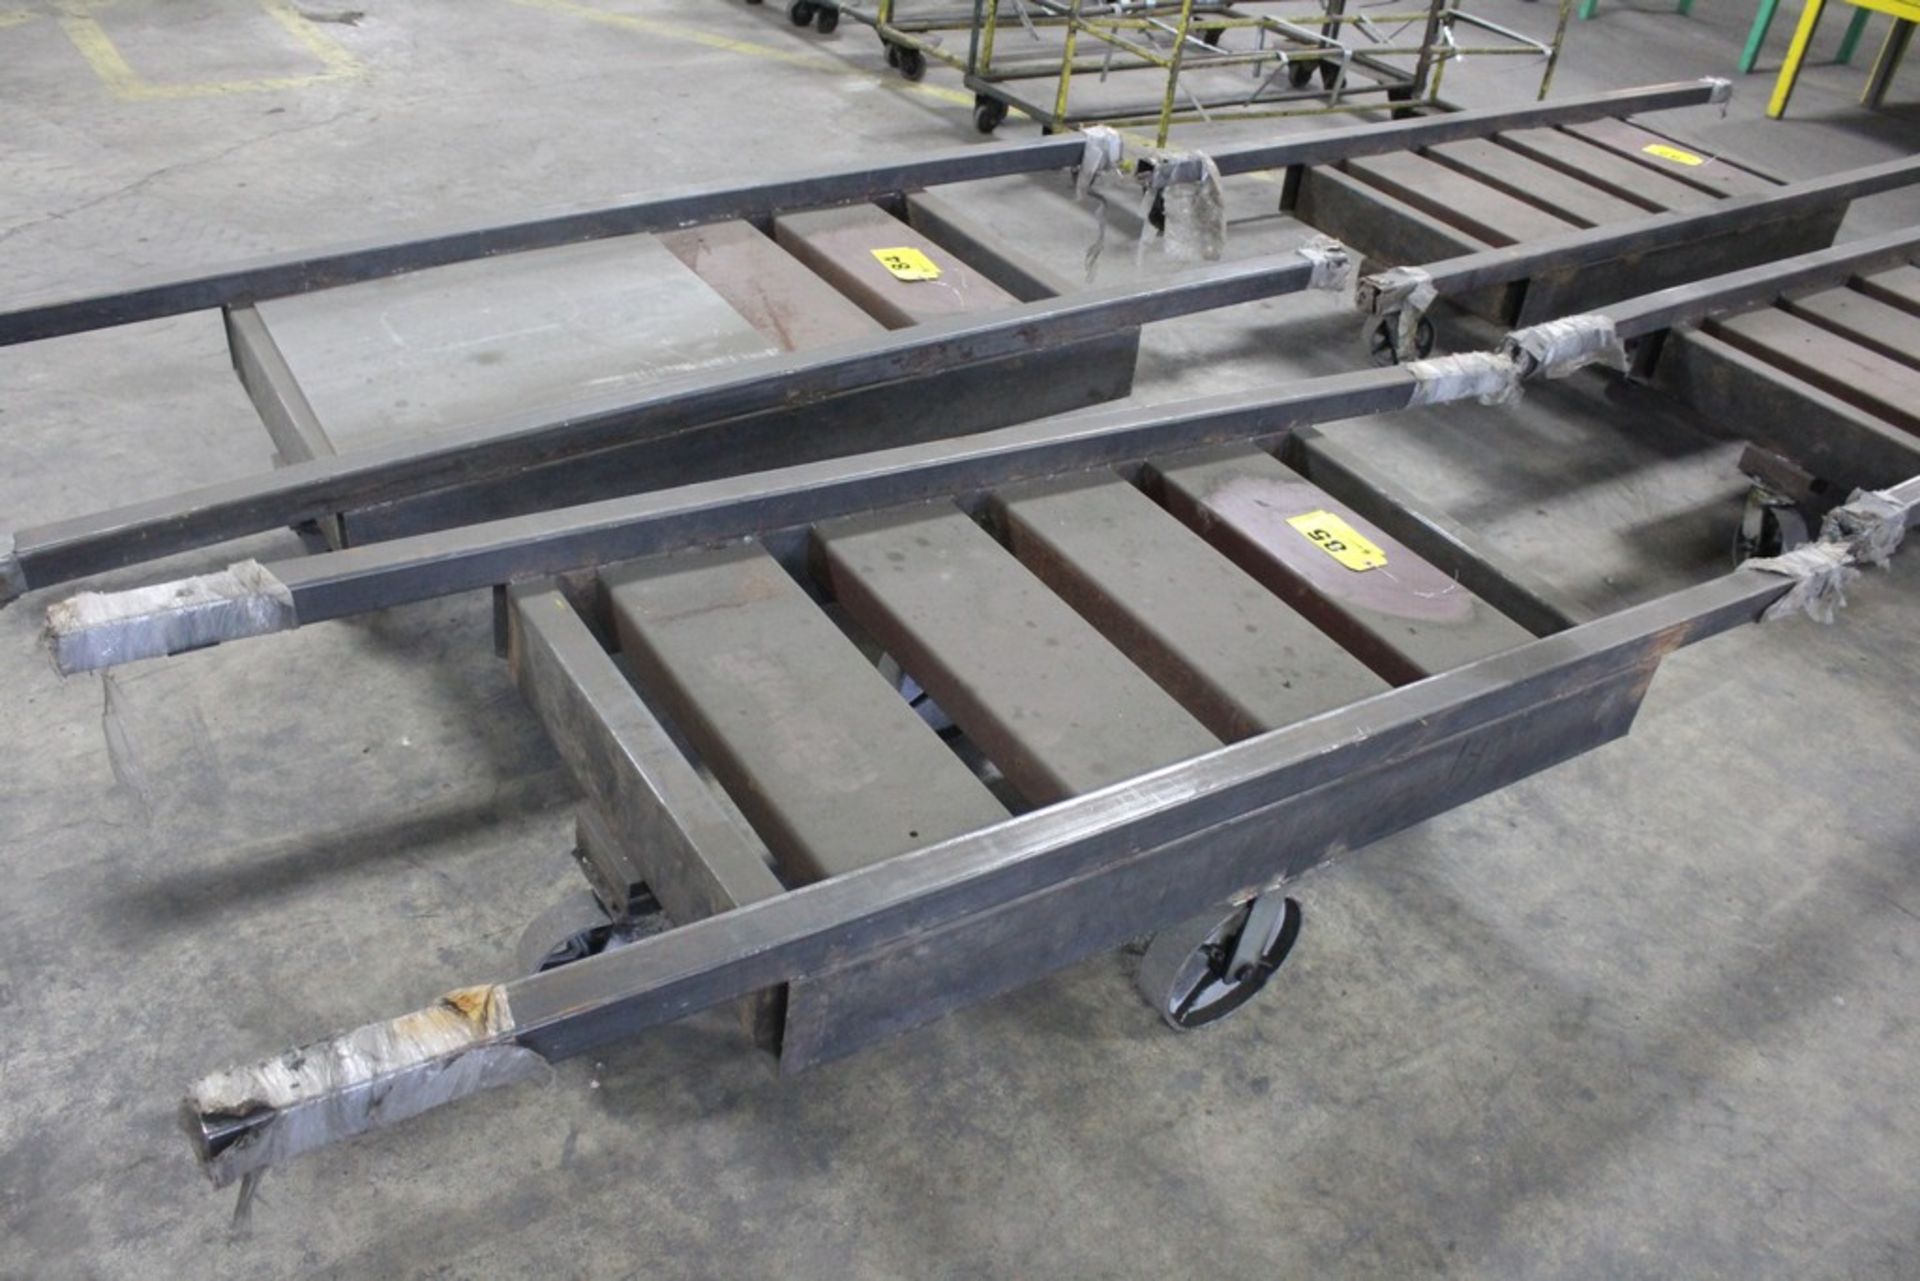 Heavy Duty Material Cart - Fabricated Metal Construction - 27" Width x 82" Length